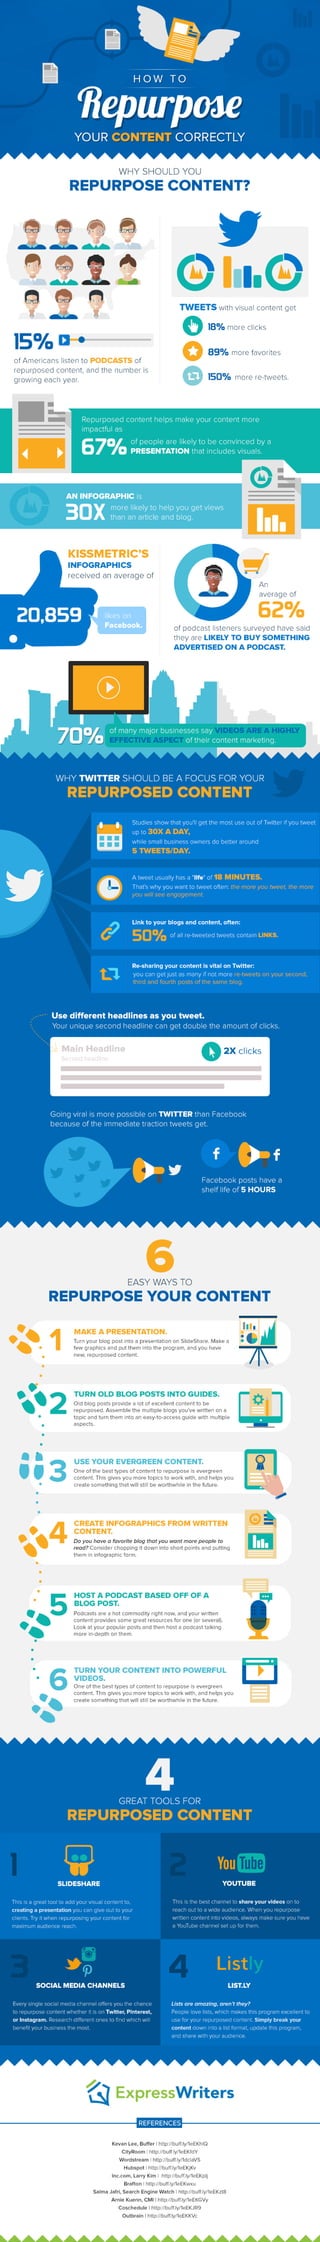 How to repurpose your content correctly   infographic